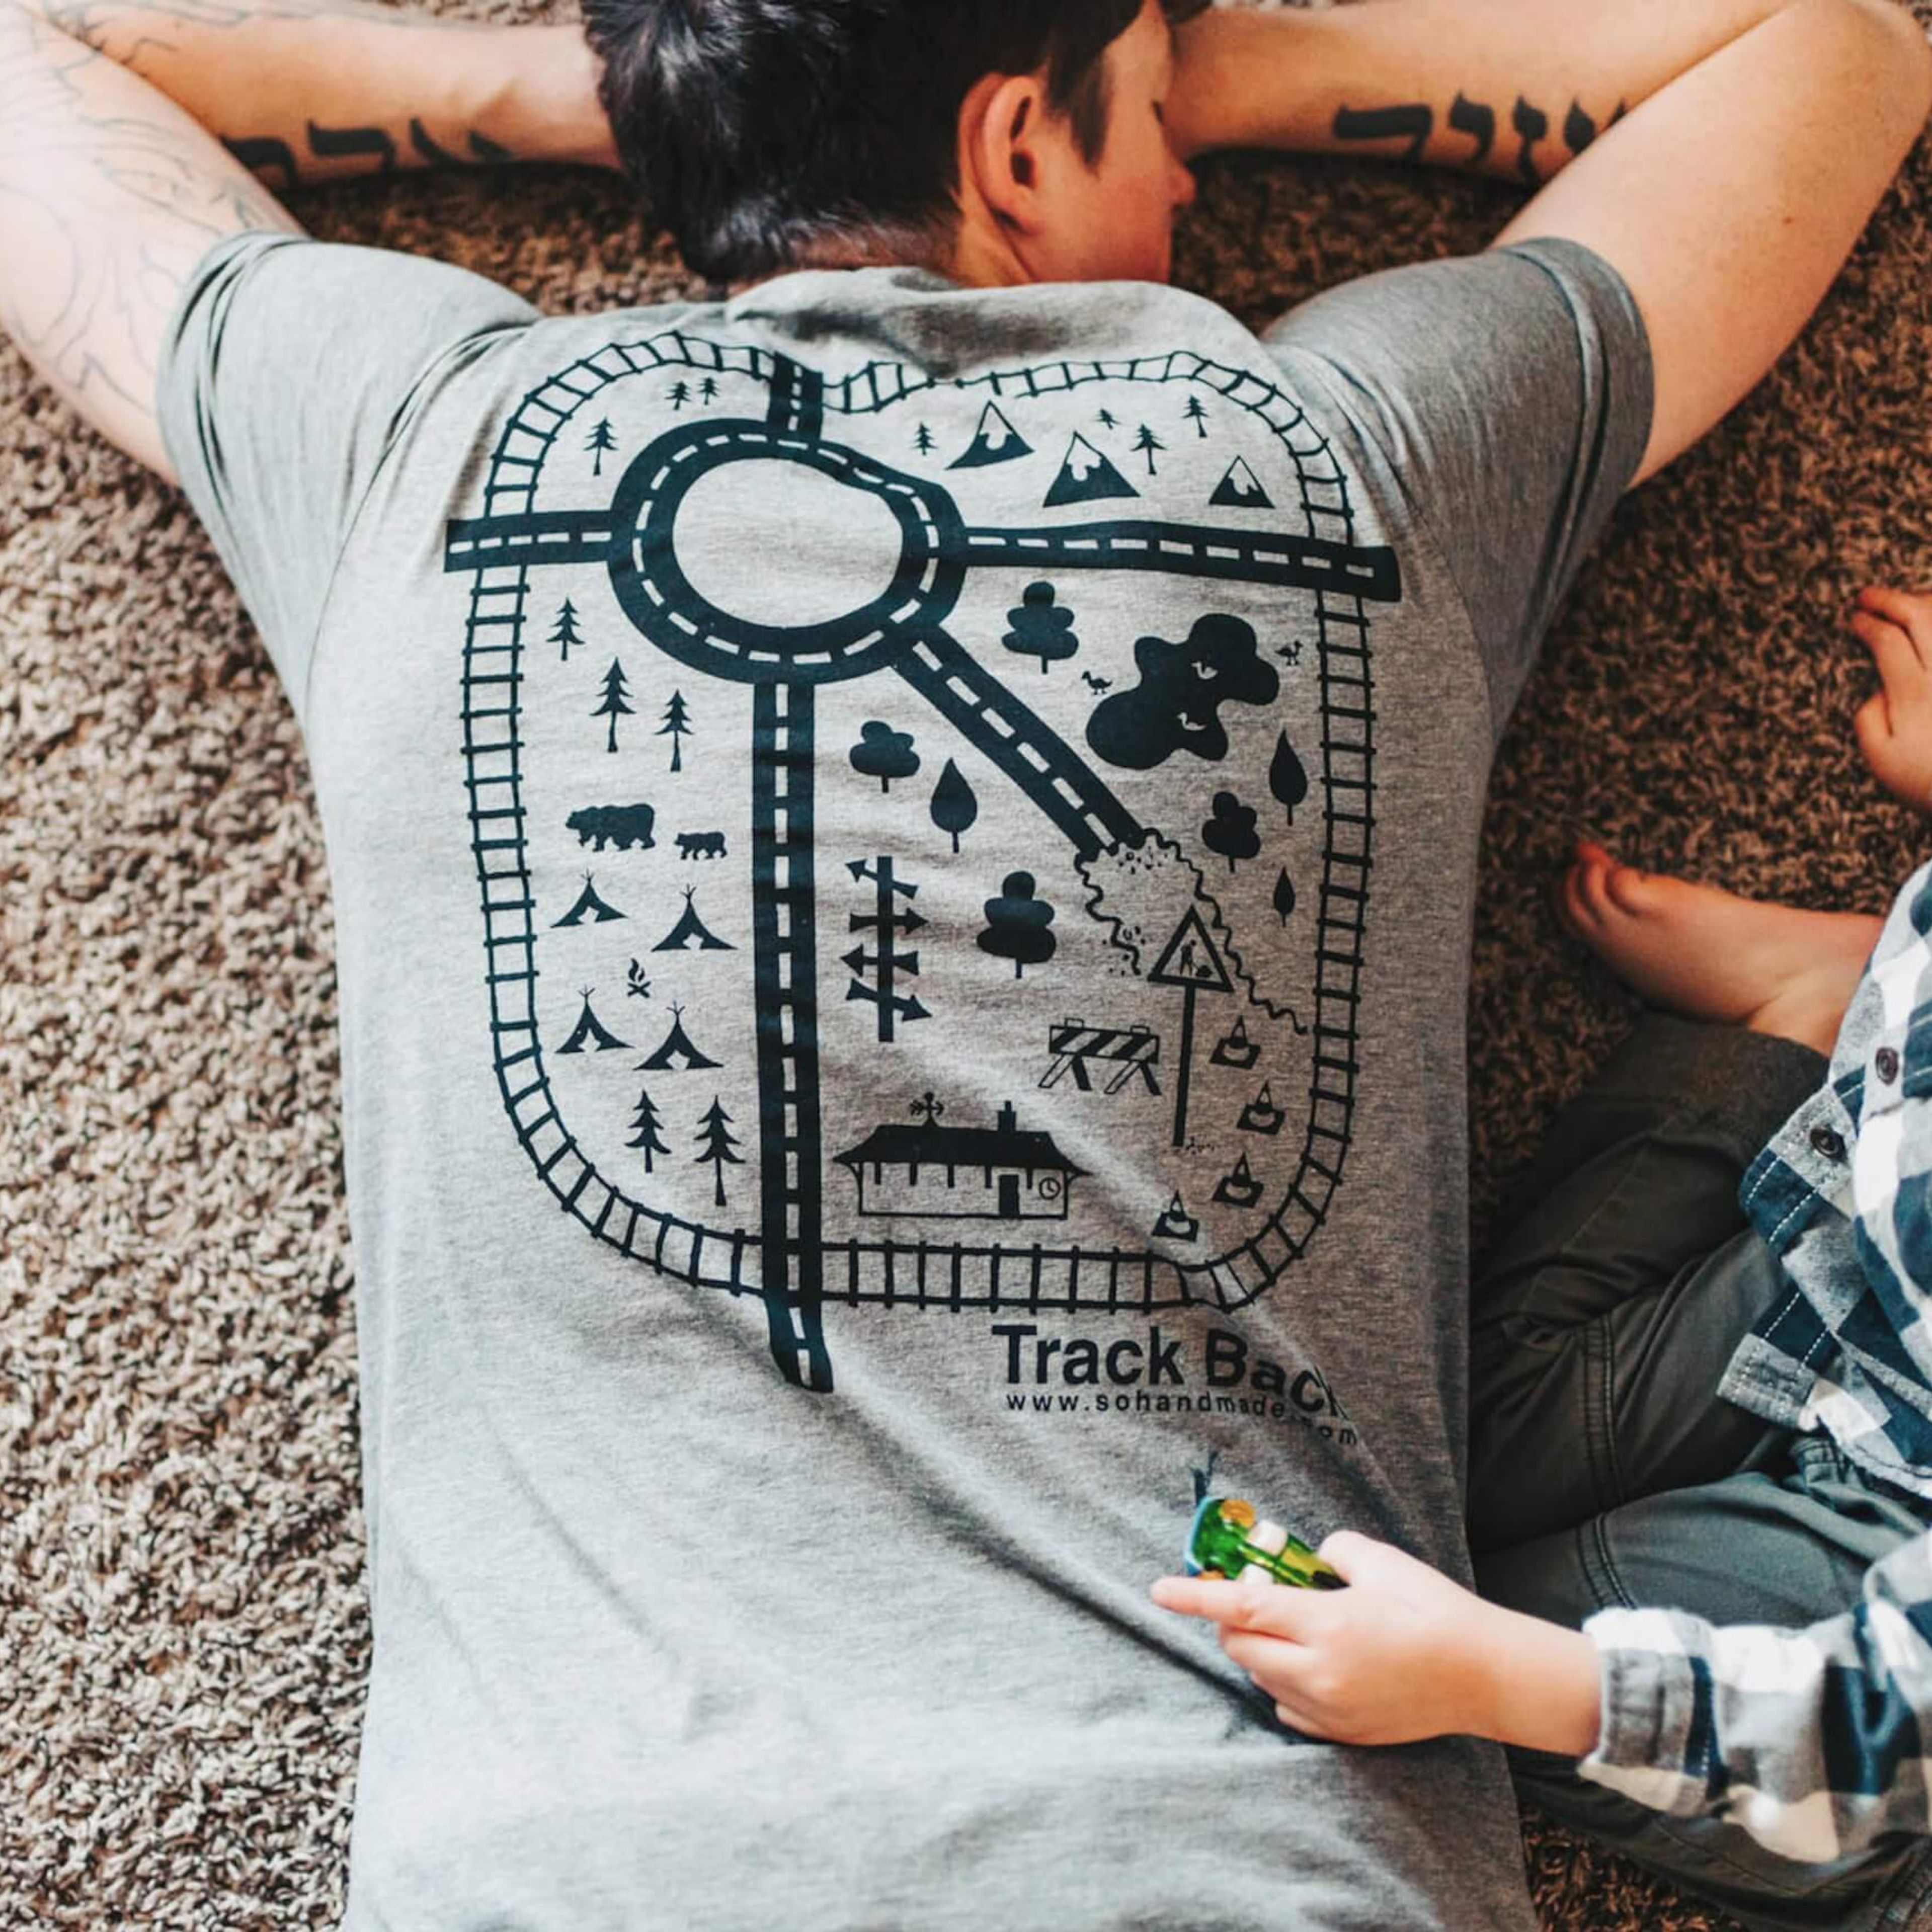 Car Play Mat Shirt: "This was a perfect Father's Day gift!"